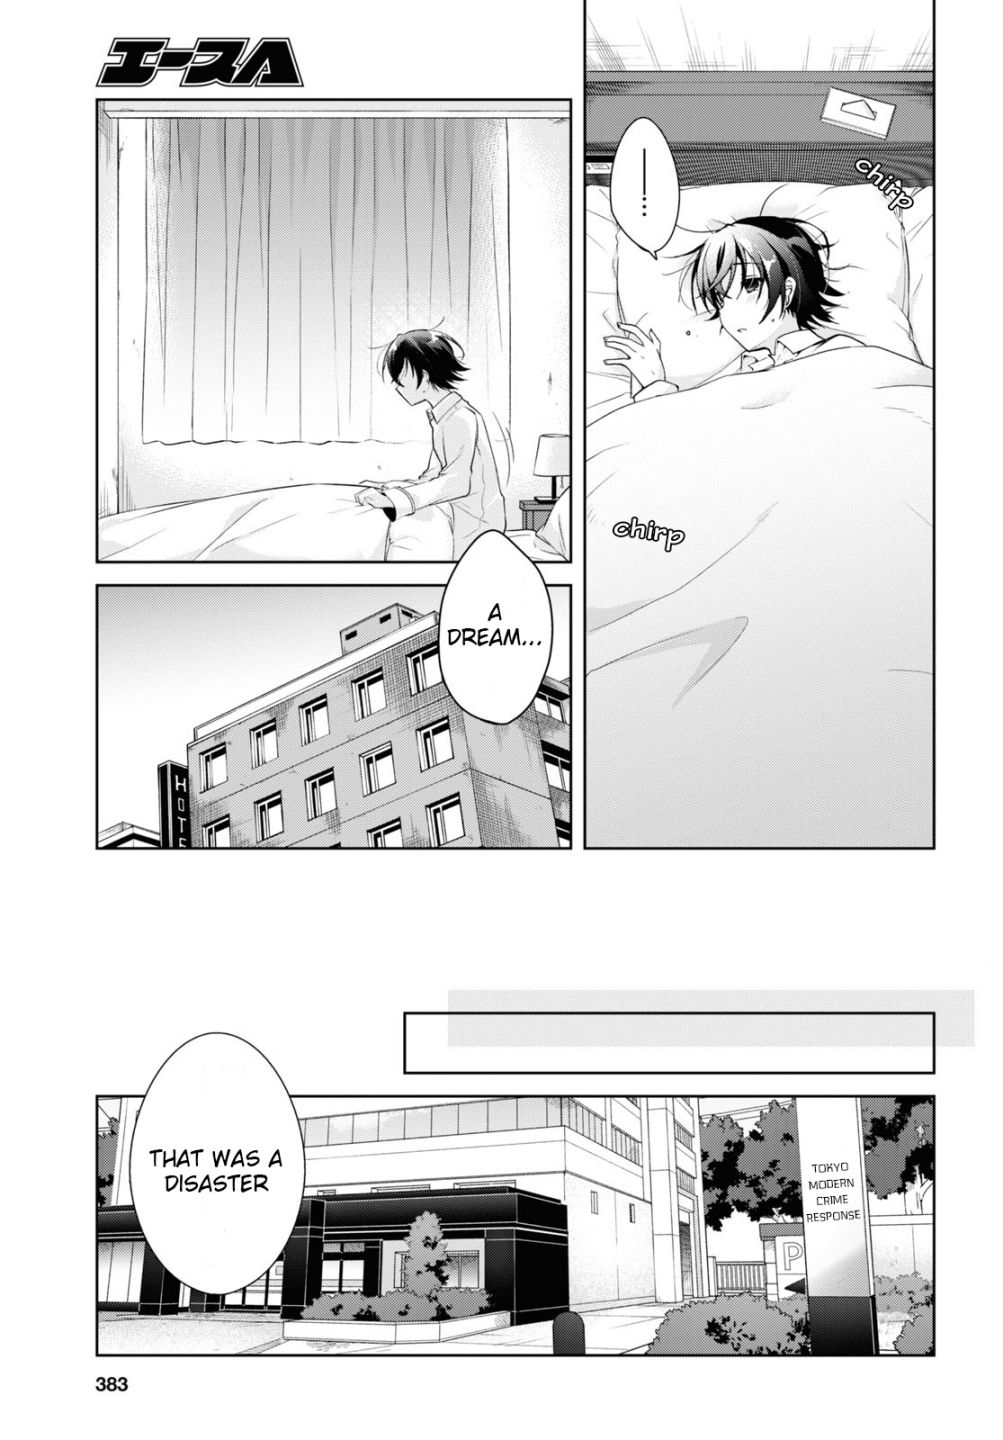 Isshiki-san Wants to Know About Love. - chapter 12 - #3